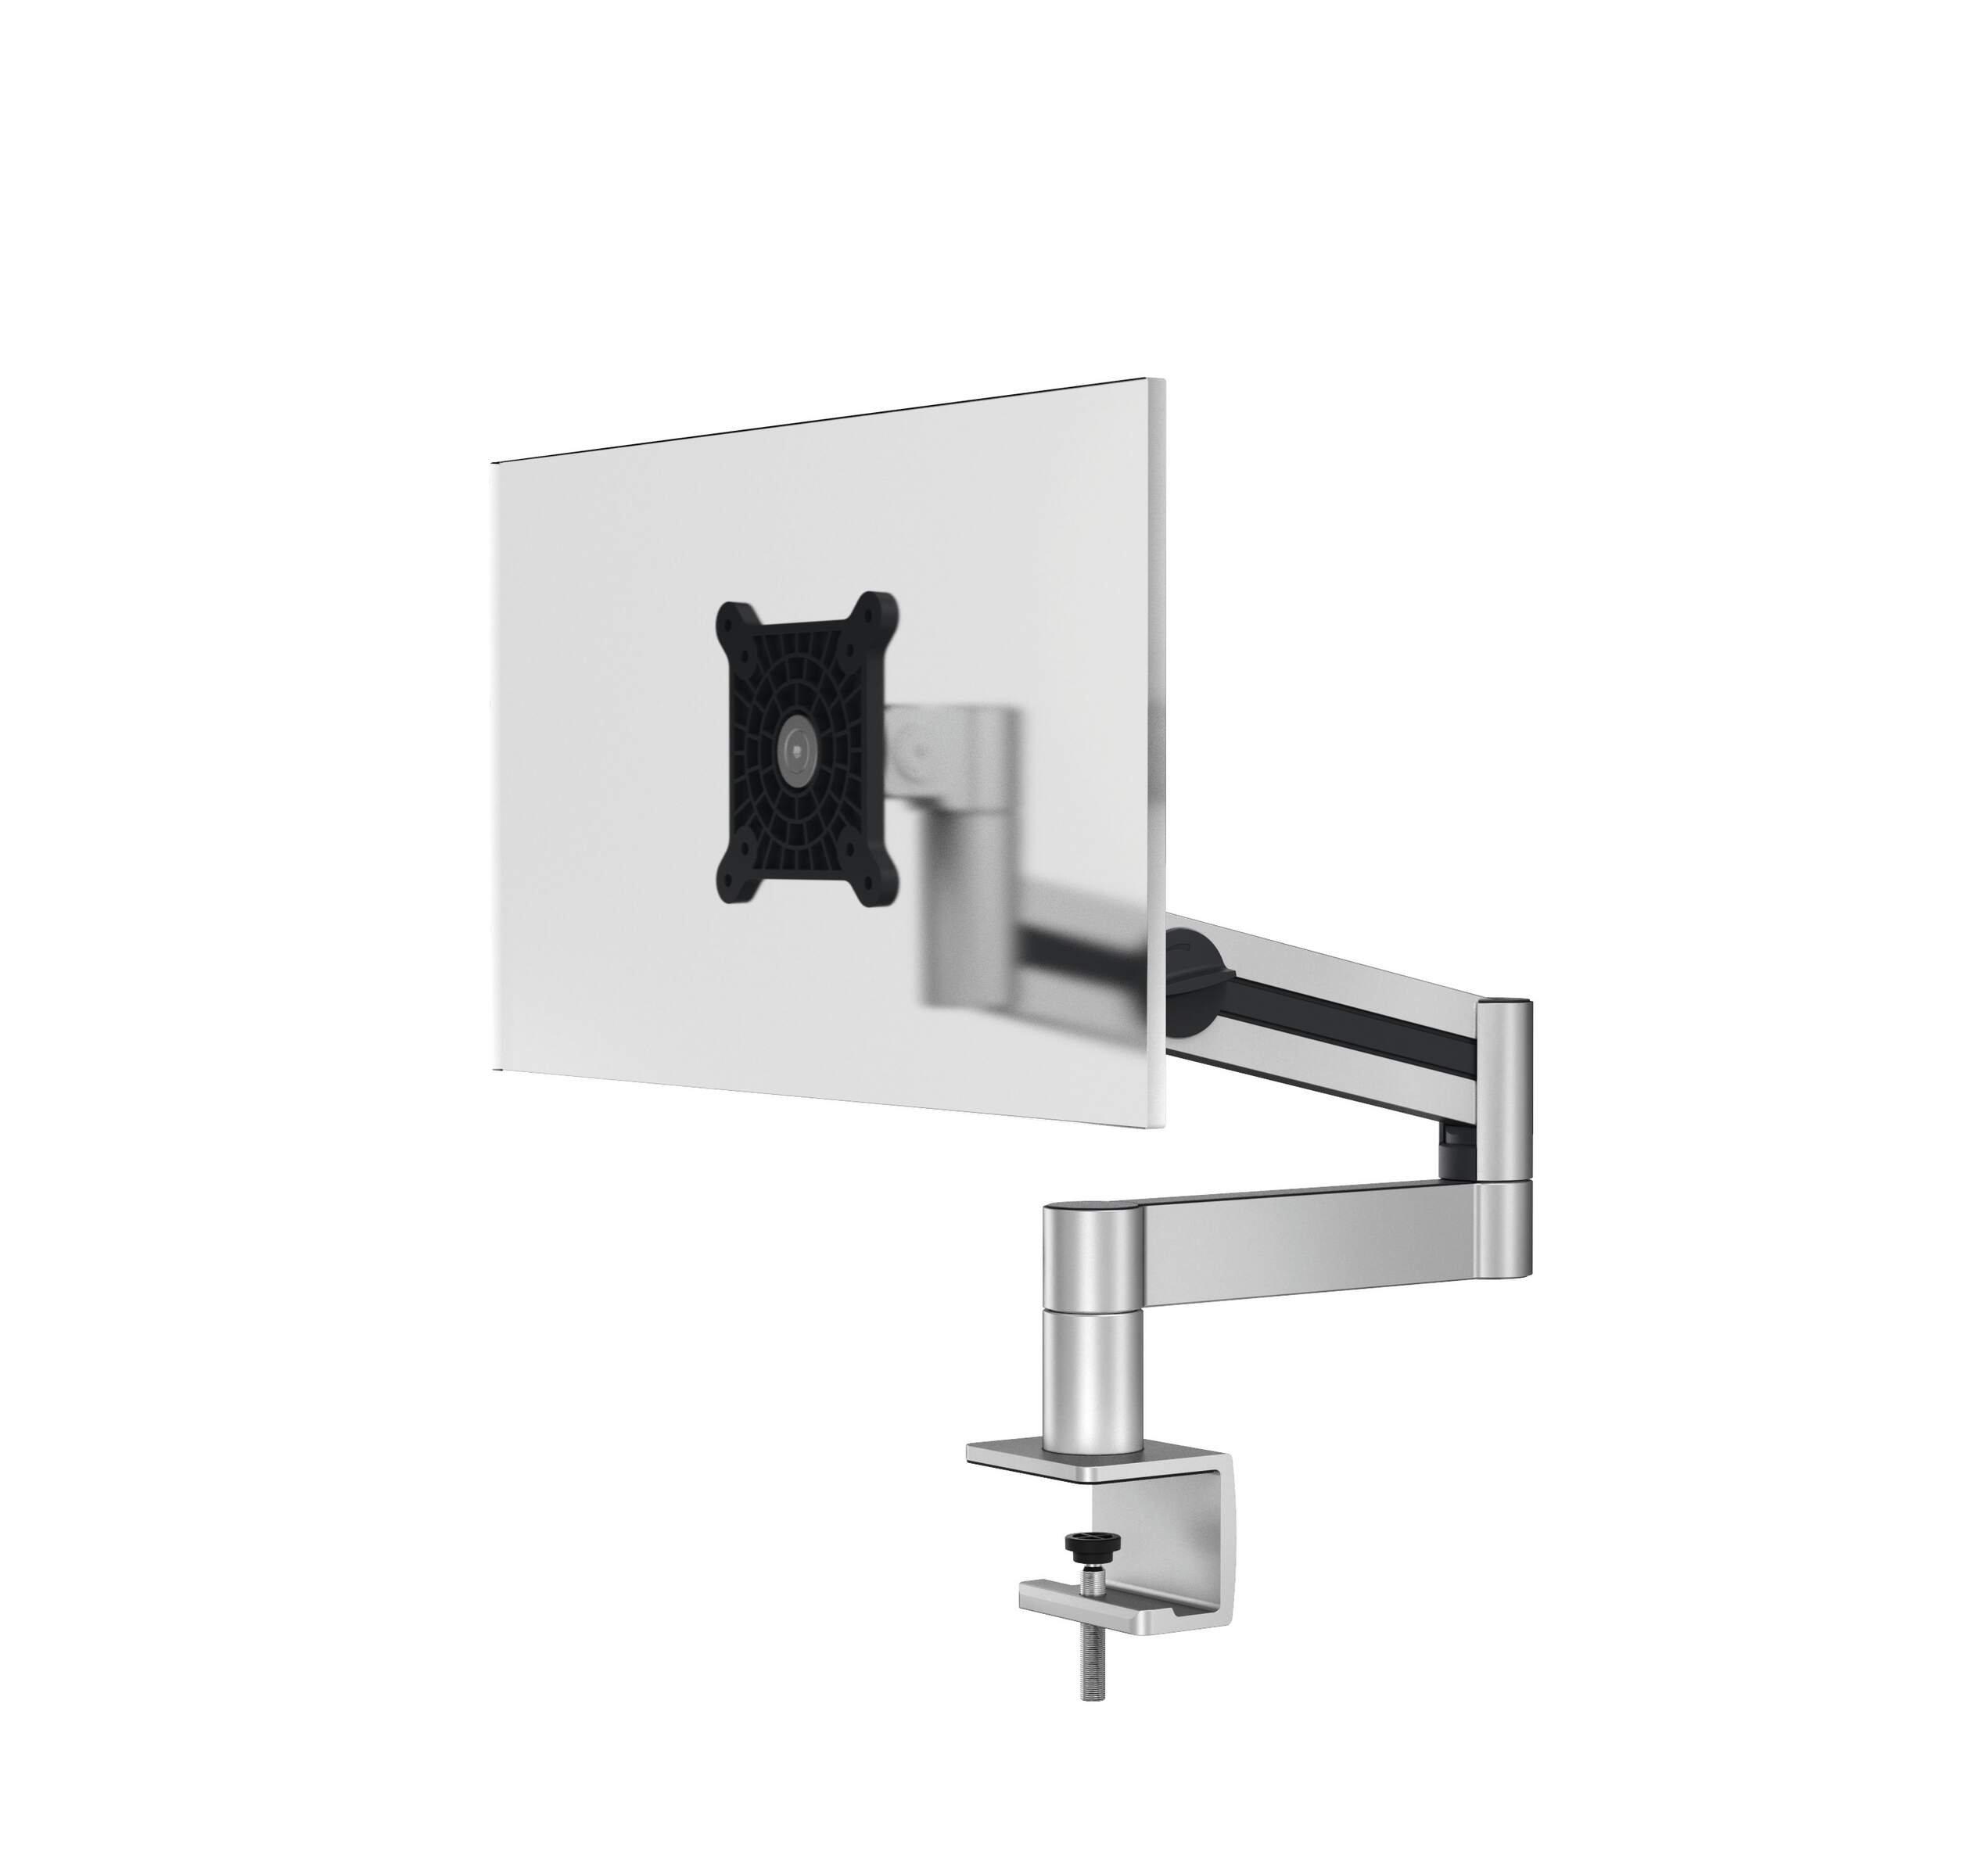 Monitor Mount with Arm for 1 Screen - Desk Clamp Attachment